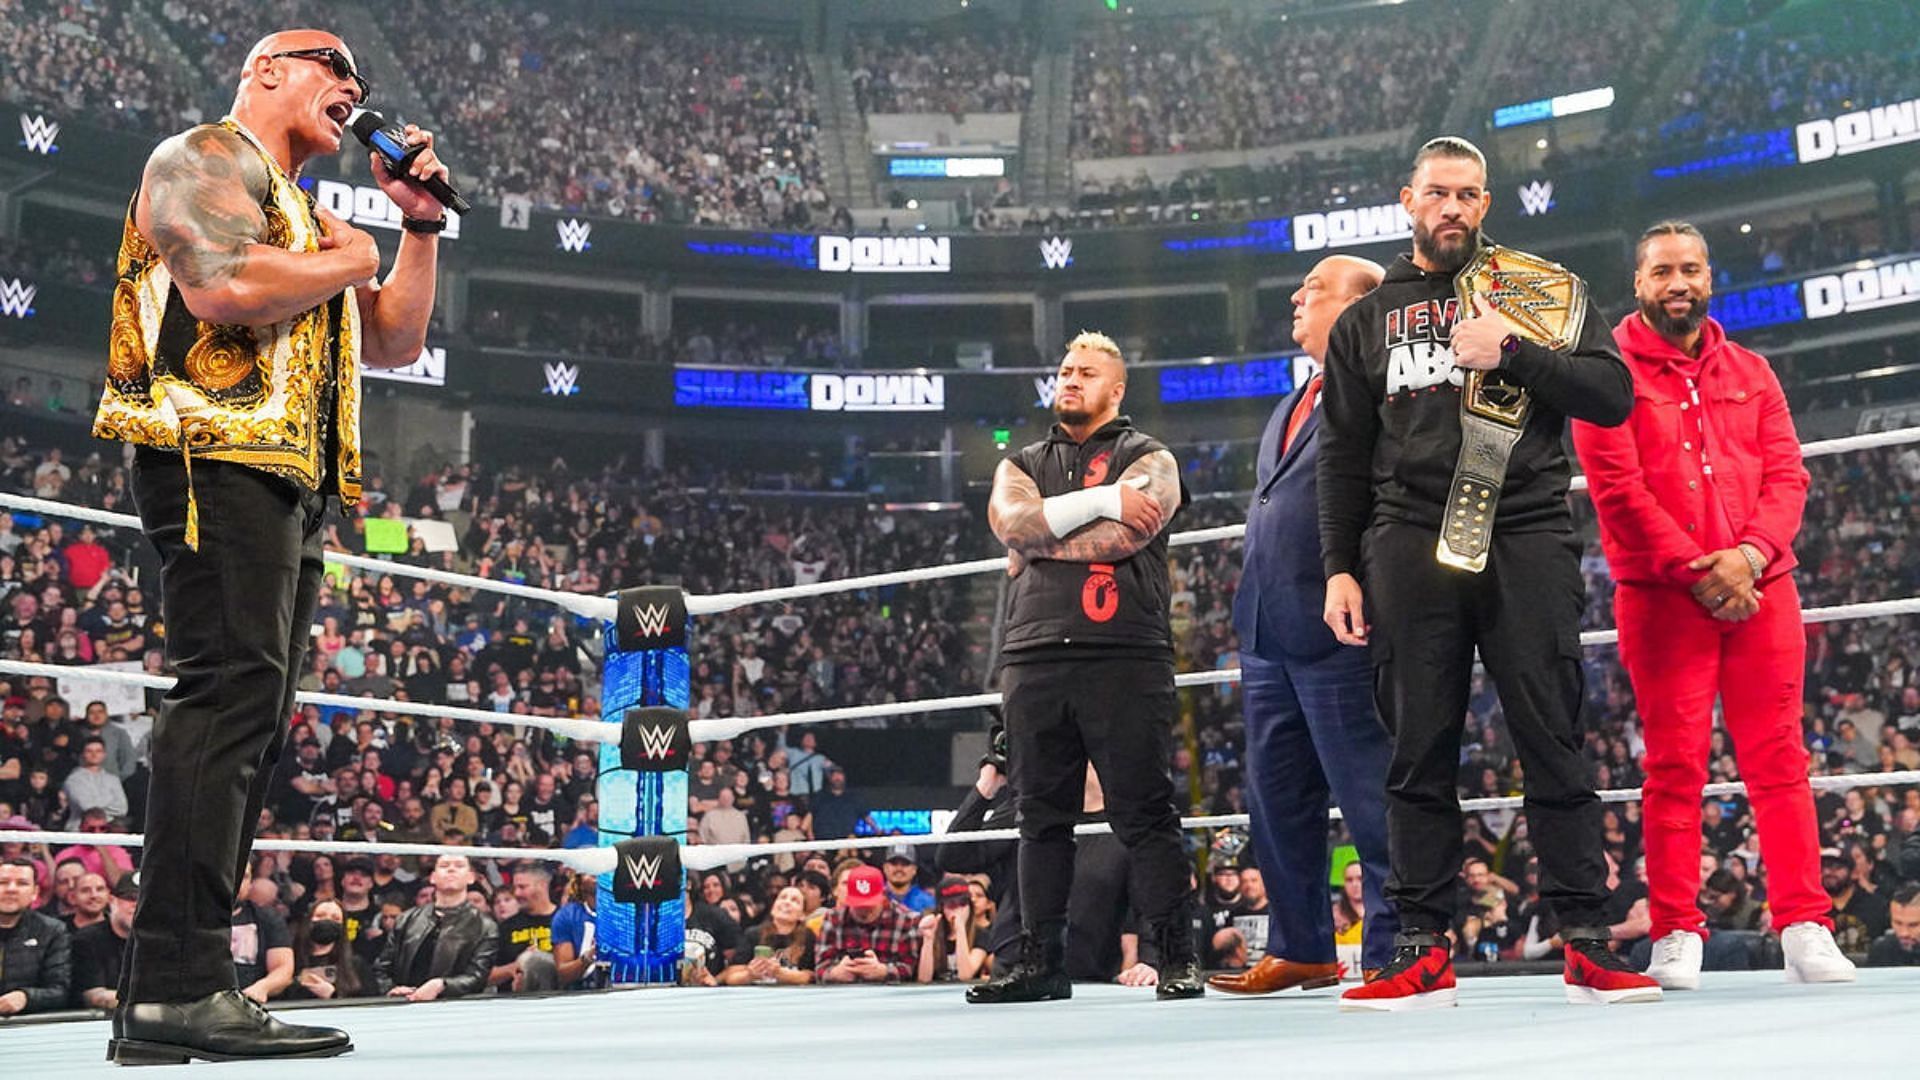 The Rock officially joined The Bloodline on SmackDown